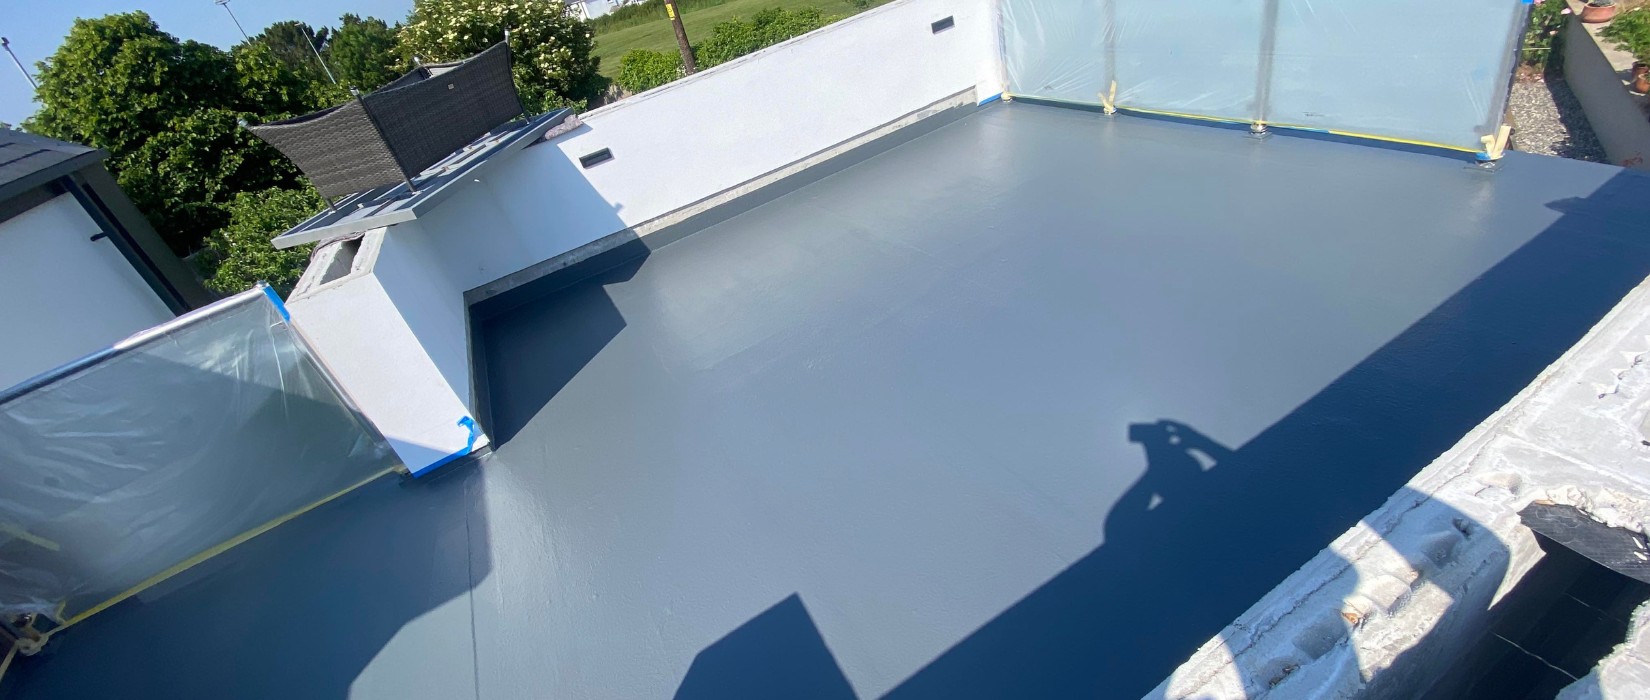 grp roofing